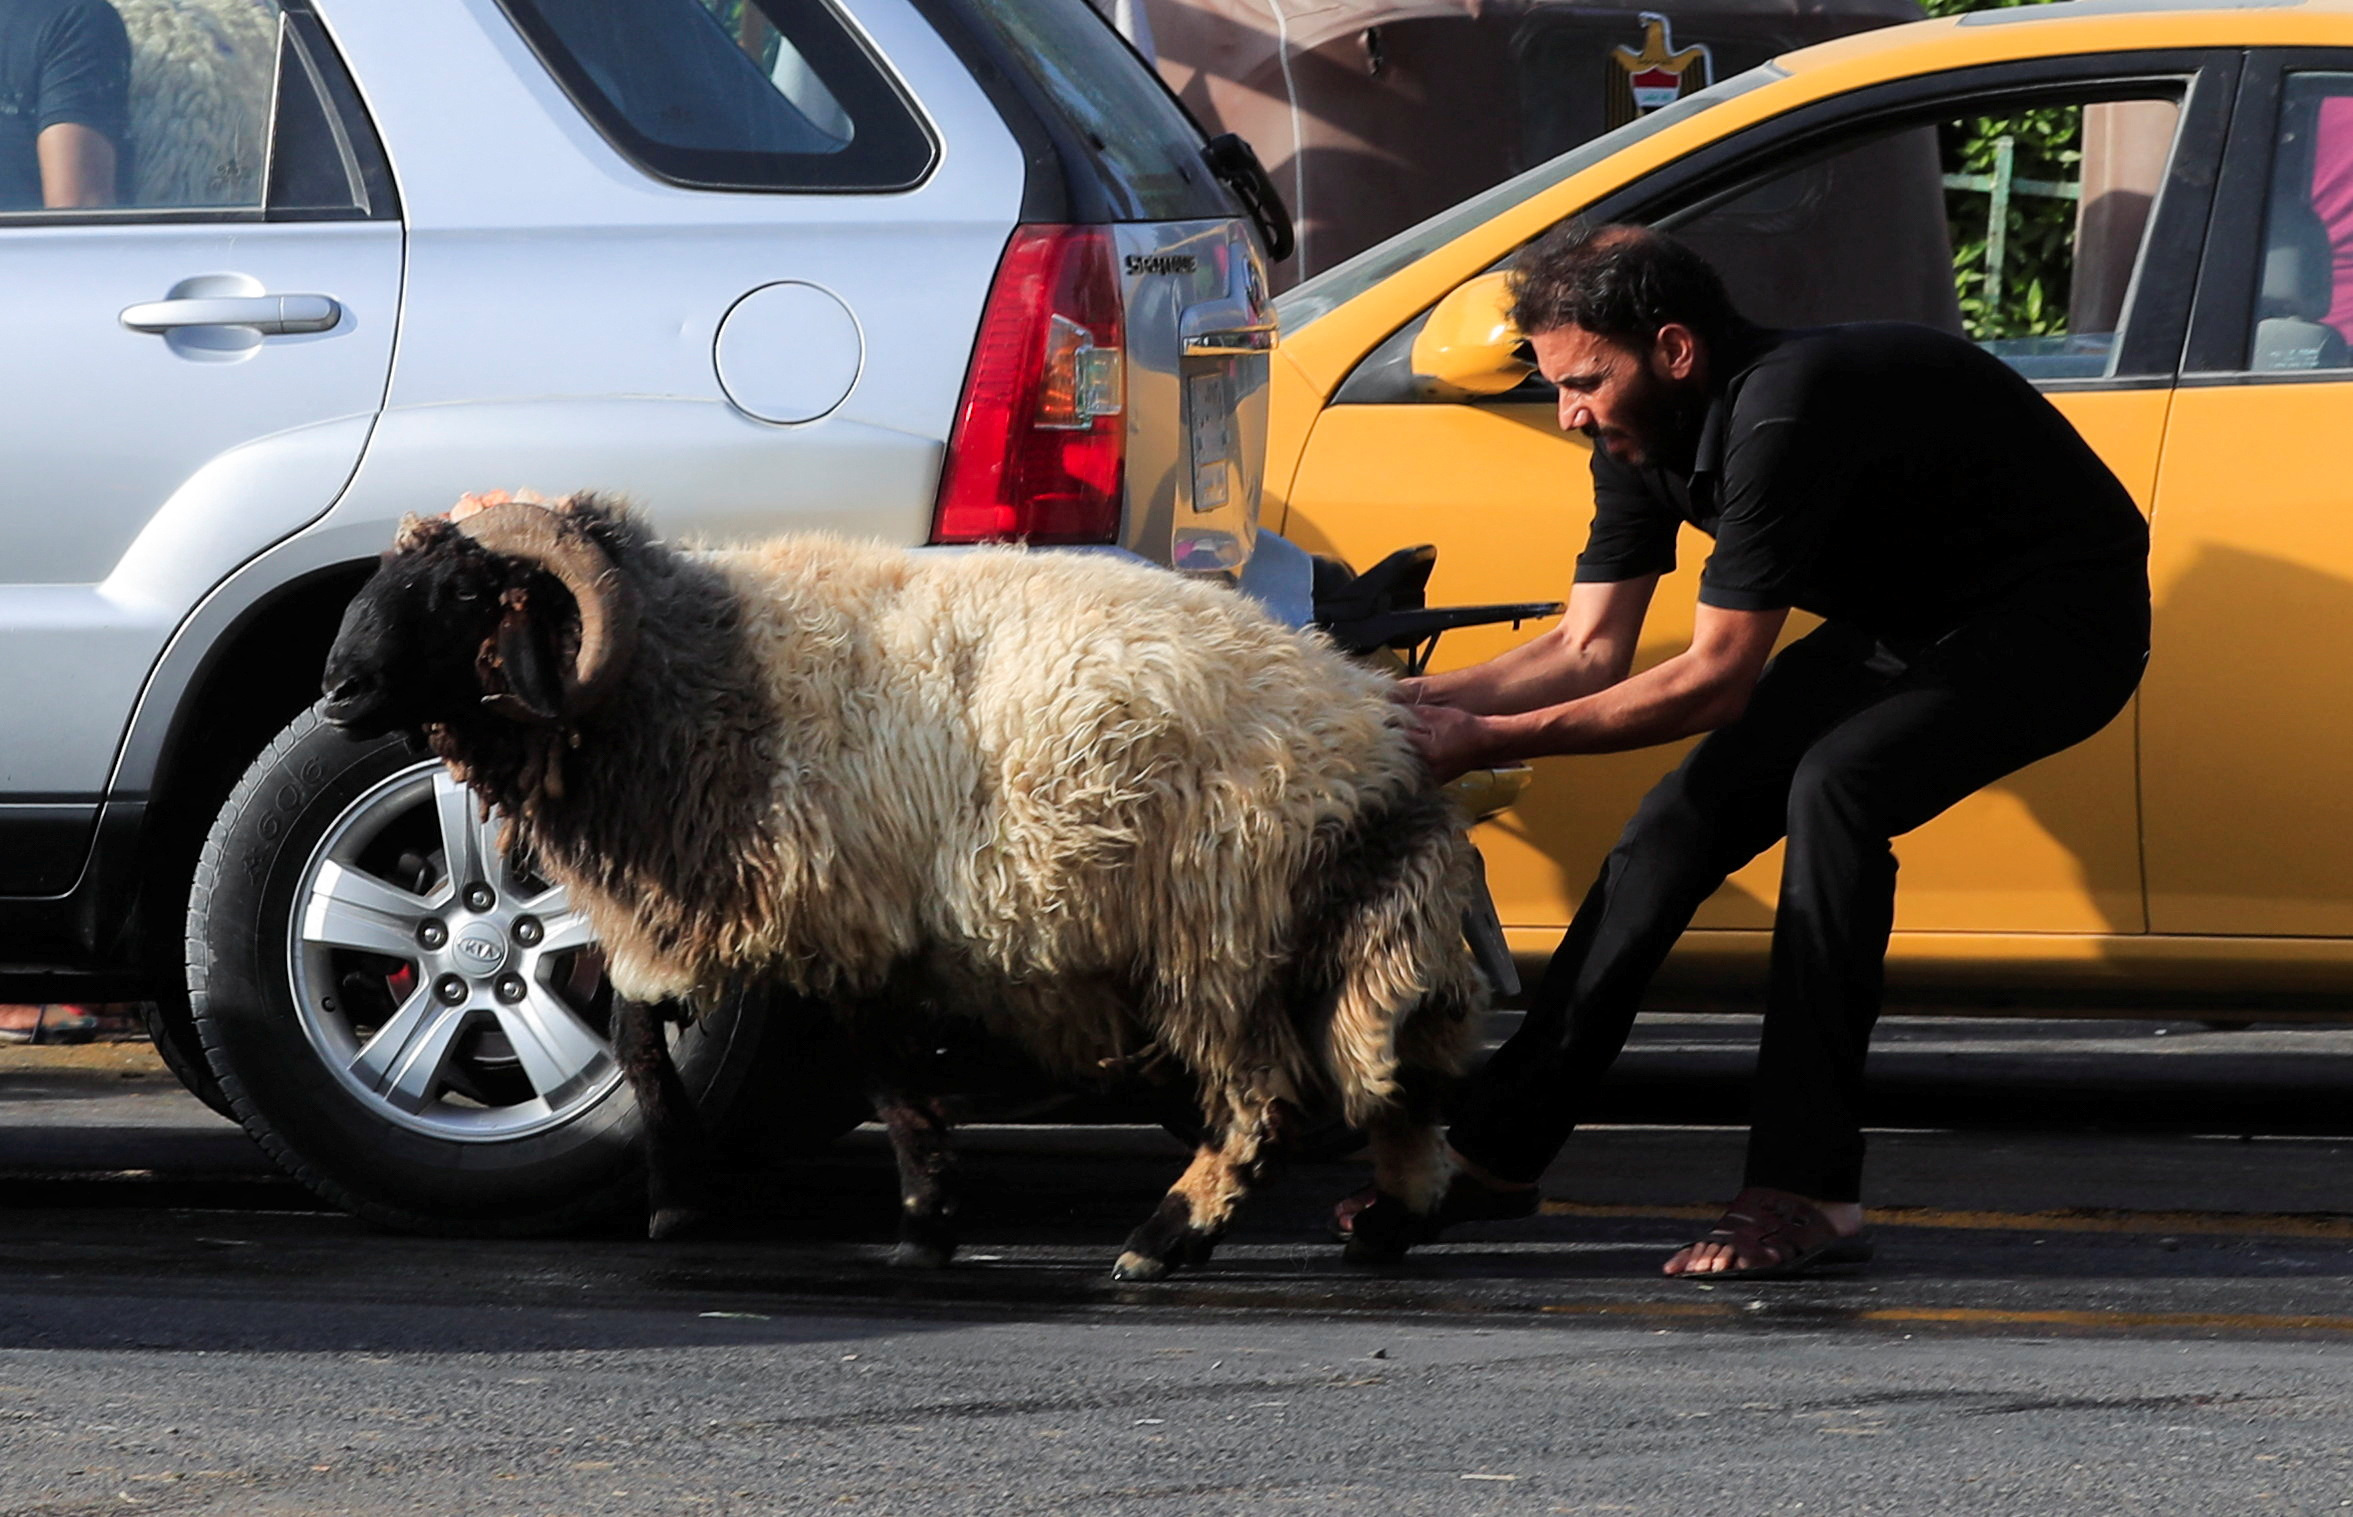 An Iraqi man pulls a sacrificial ram after purchasing it from a livestock market, ahead of the Eid al-Adha festival, in Baghdad